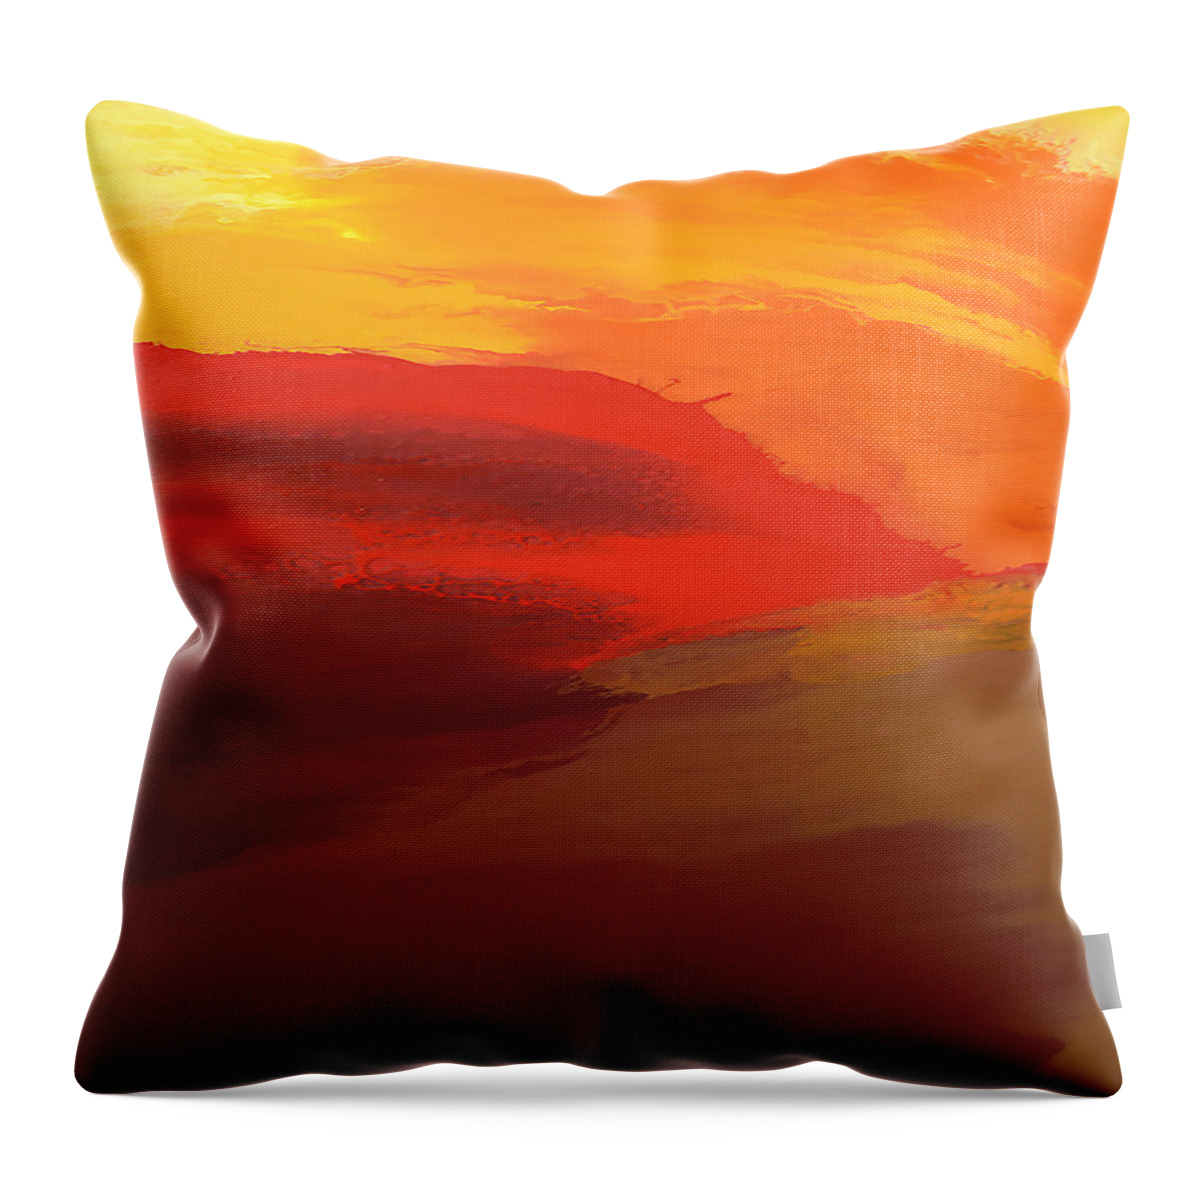 Sunrise Throw Pillow featuring the painting Invigorating by Linda Bailey